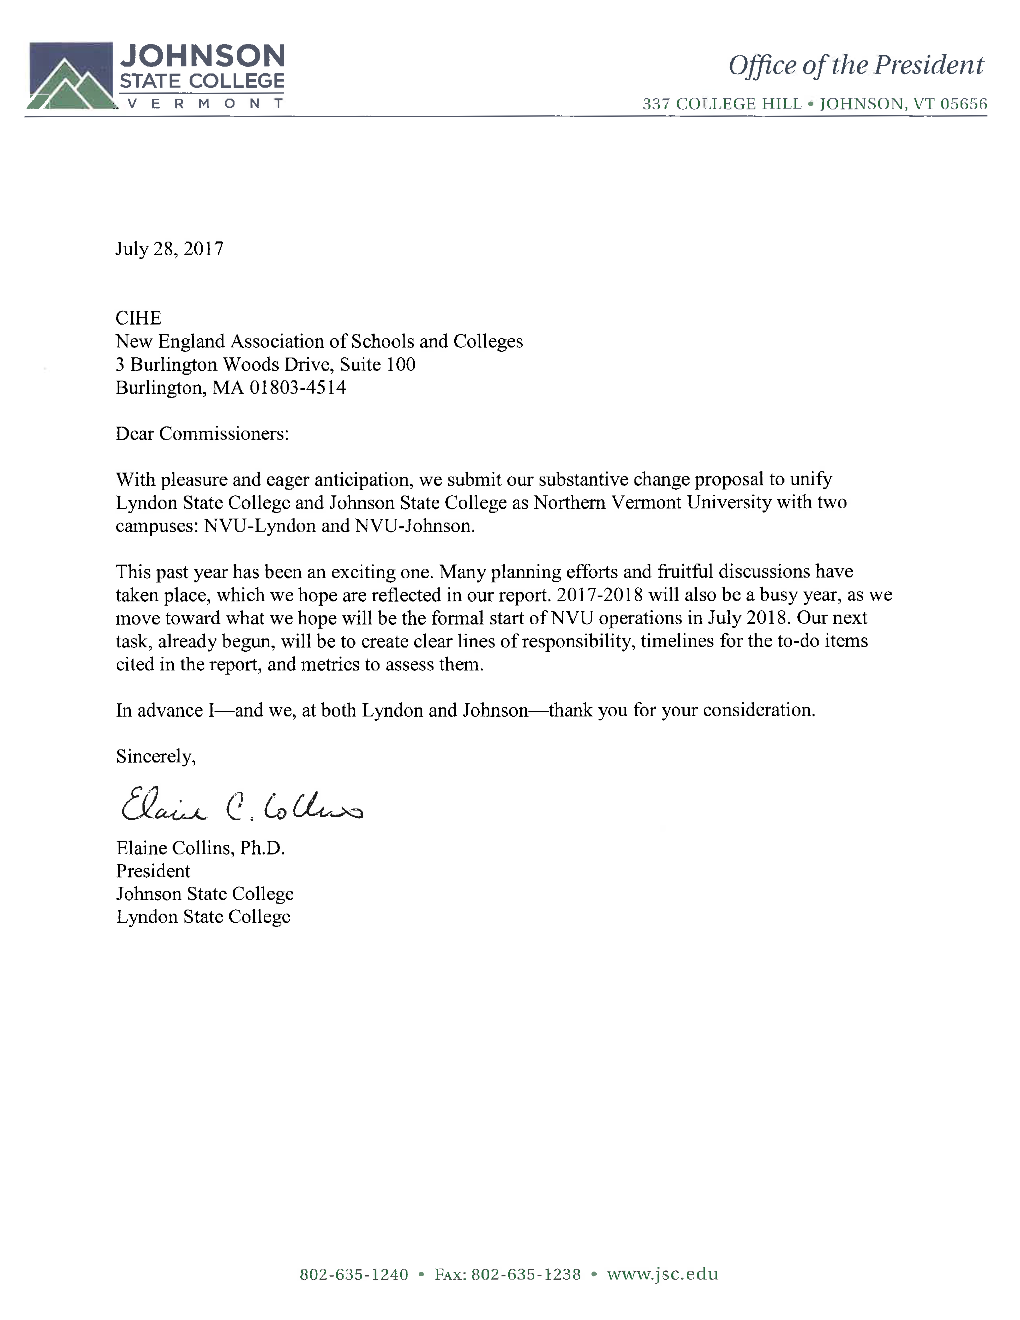 Substantive Change Request to Unify Johnson State College and Lyndon